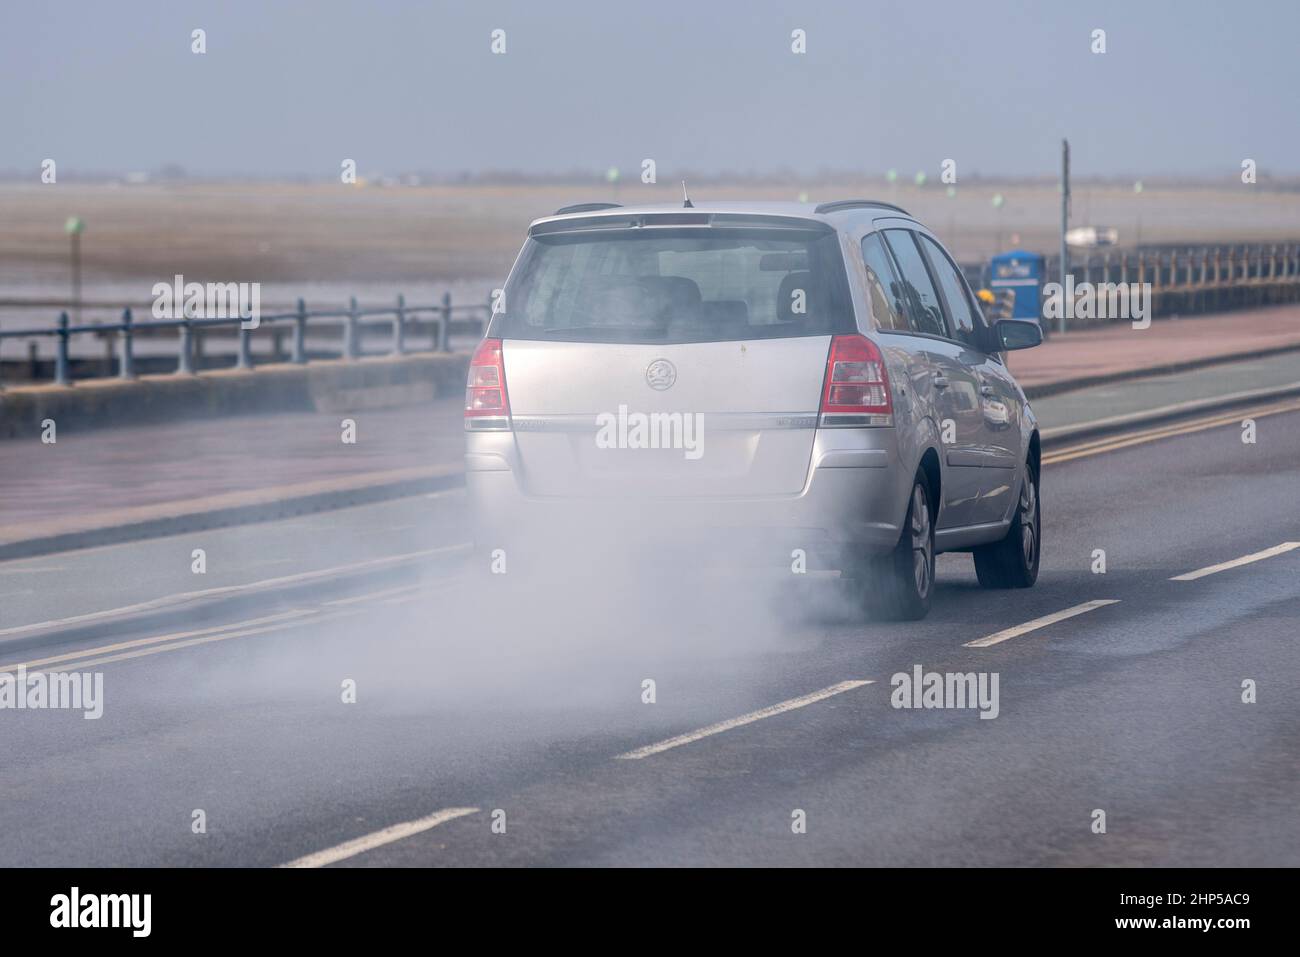 Old car with very smoky exhaust driving on the seafront road at Southend on Sea, Essex, UK. Polluting vehicle gas emissions Stock Photo